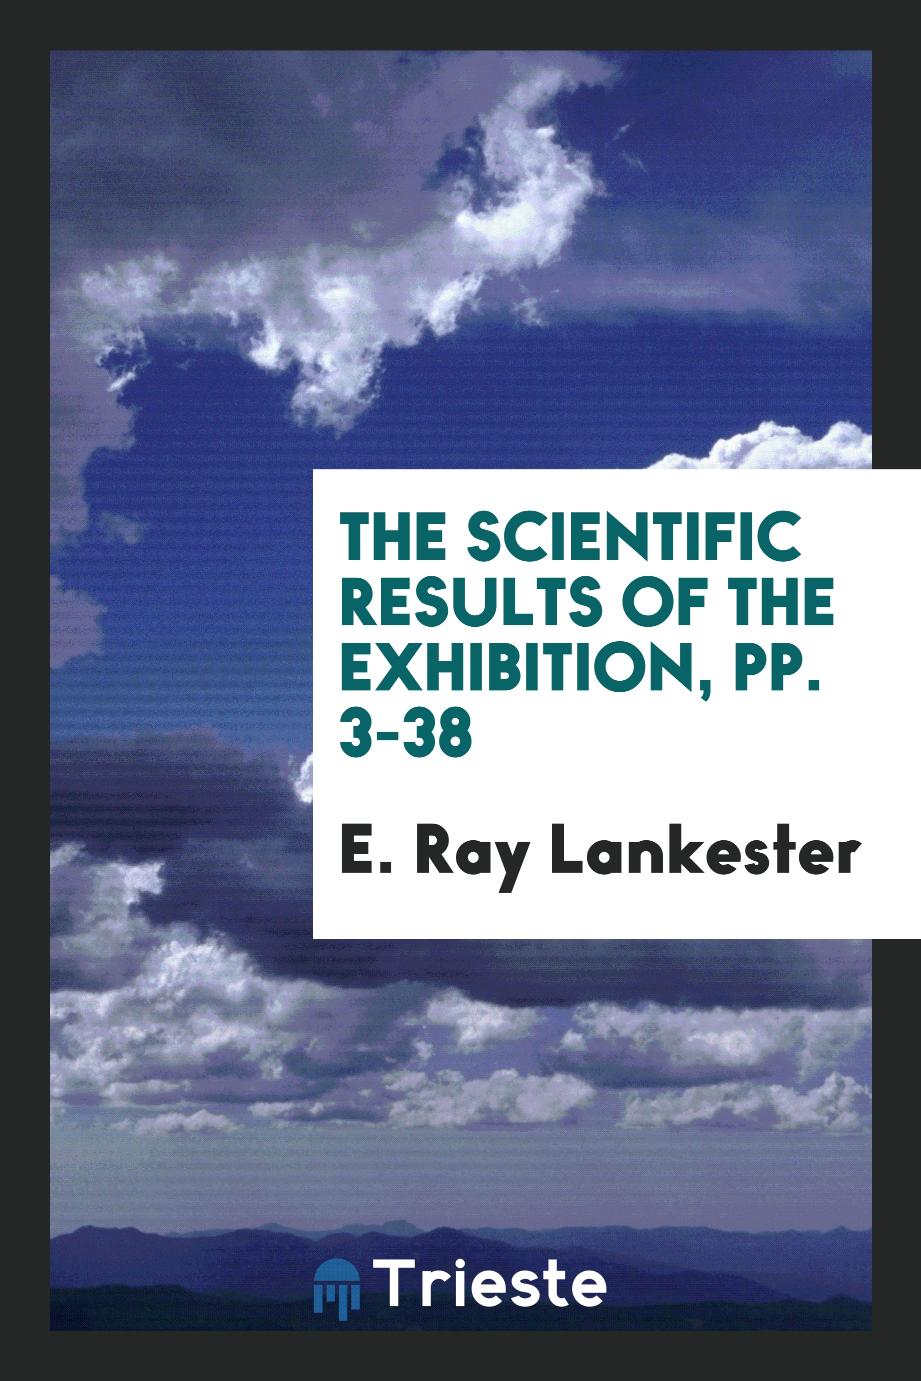 The Scientific Results of the Exhibition, pp. 3-38